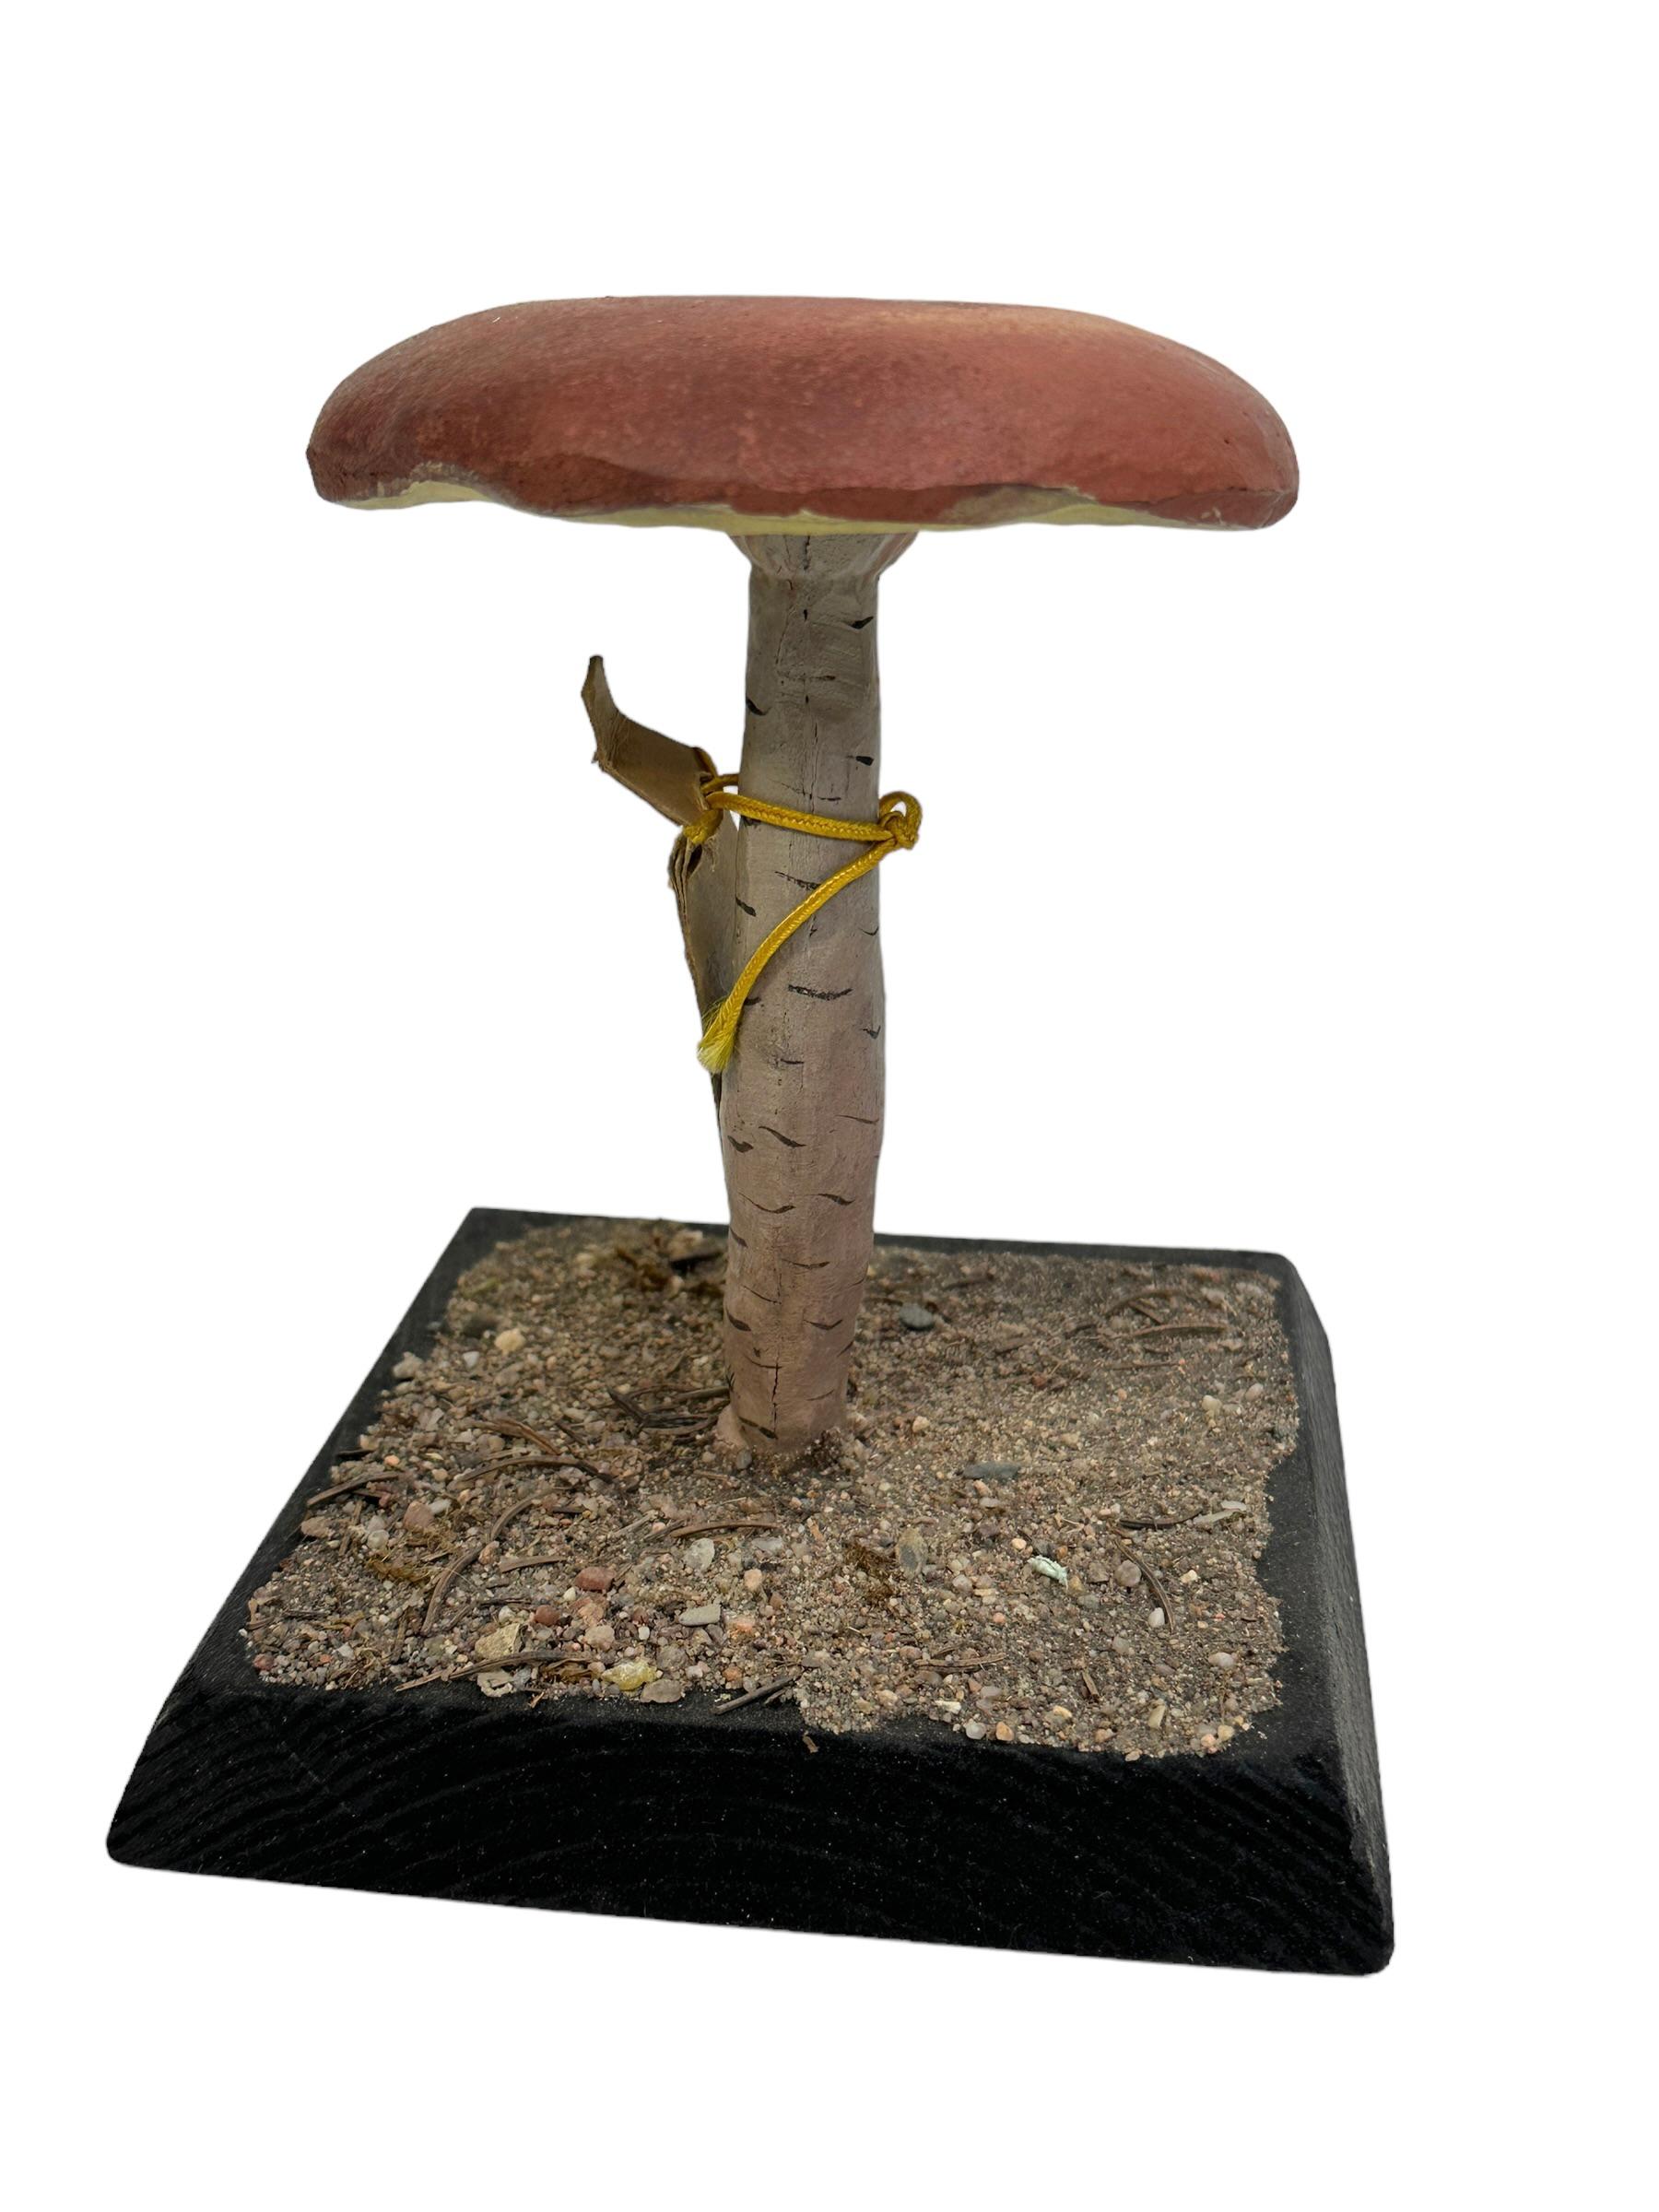 This rare vintage model of a botanical scientific specimen depicts a mushroom native to Central Europe. This kind of items are used as teaching material in German schools or as showpieces in pharmacies. Colorful in natural design they show the